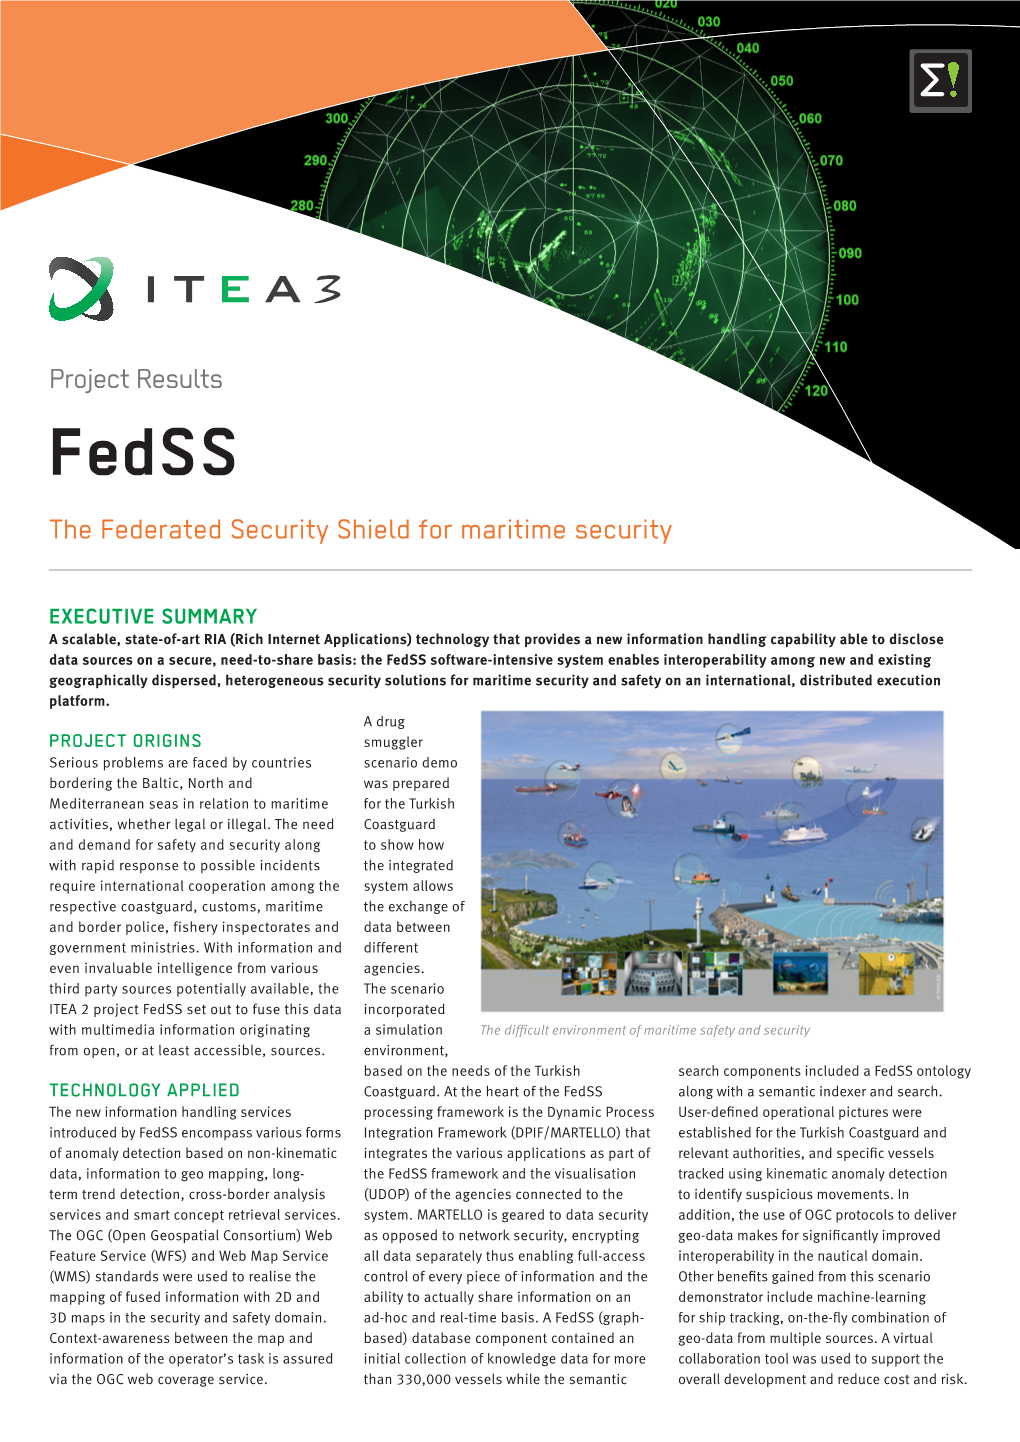 The Federated Security Shield for Maritime Security Project Results